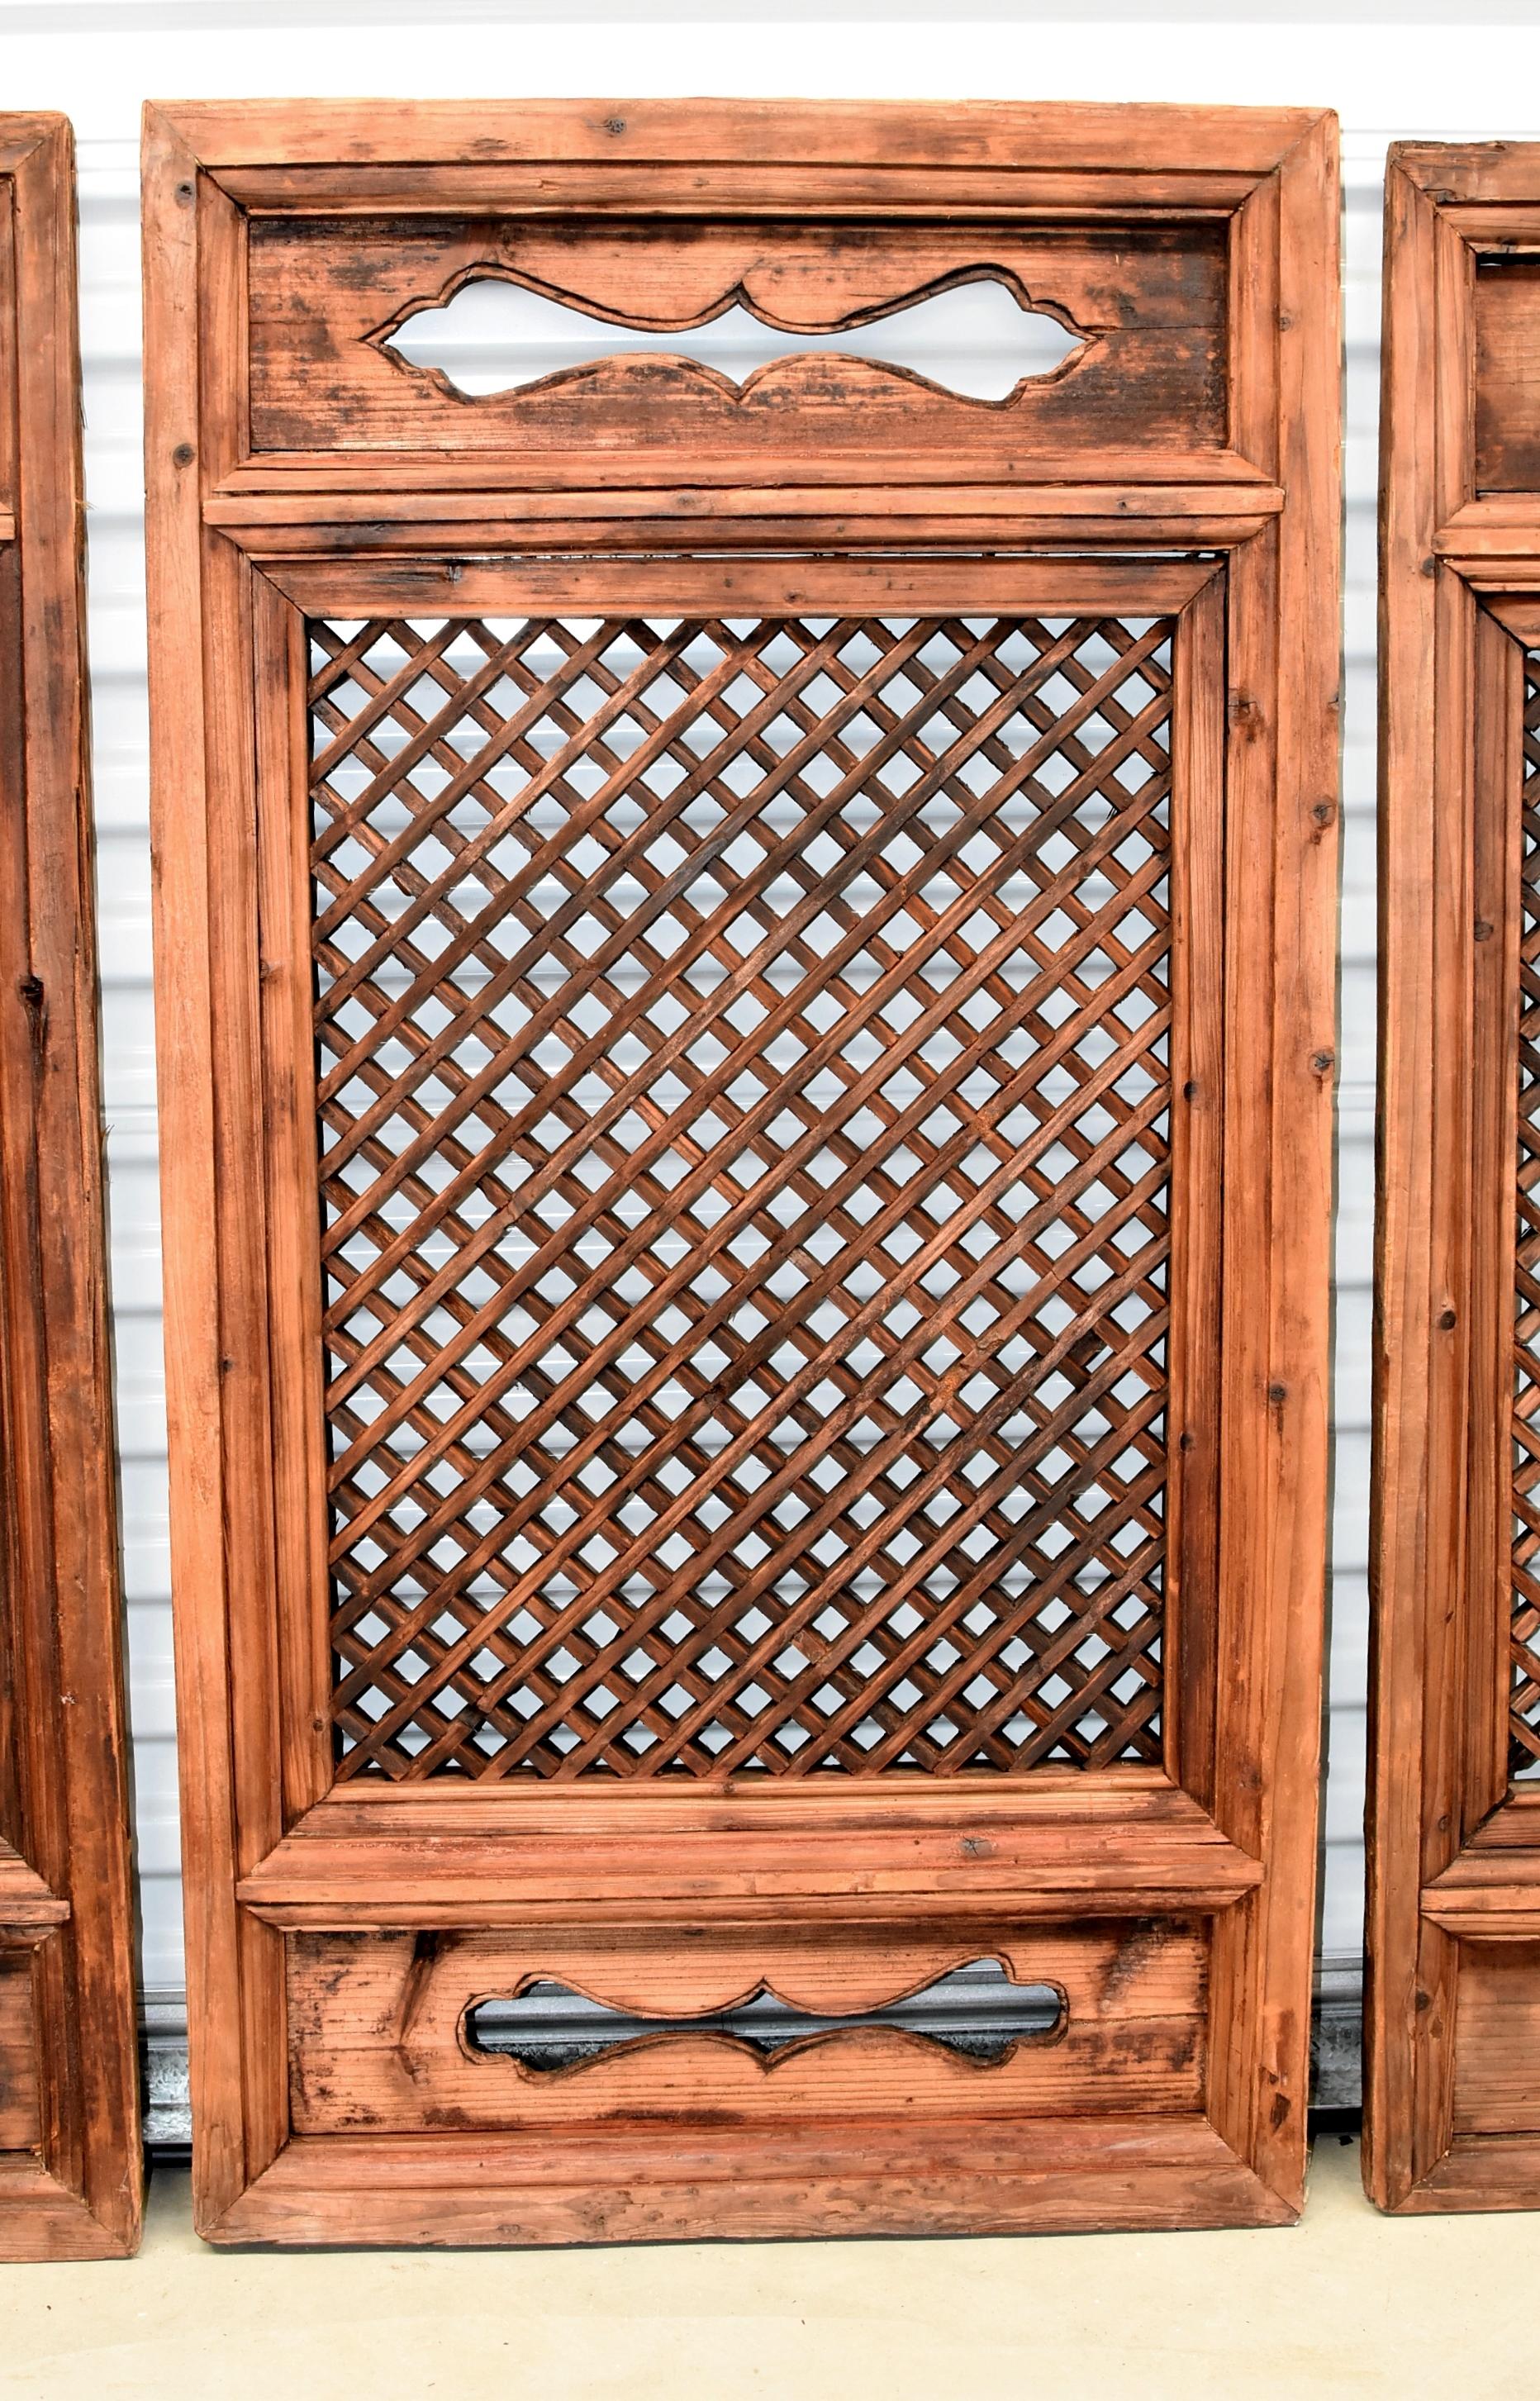 Set of five 19th century Ming style Chinese antique window screens featuring stylized, hand-carved ruyi and small cube design. The cubes are formed by joining custom cut pieces of wood using tenons and mortises, an incredibly painstaking process.